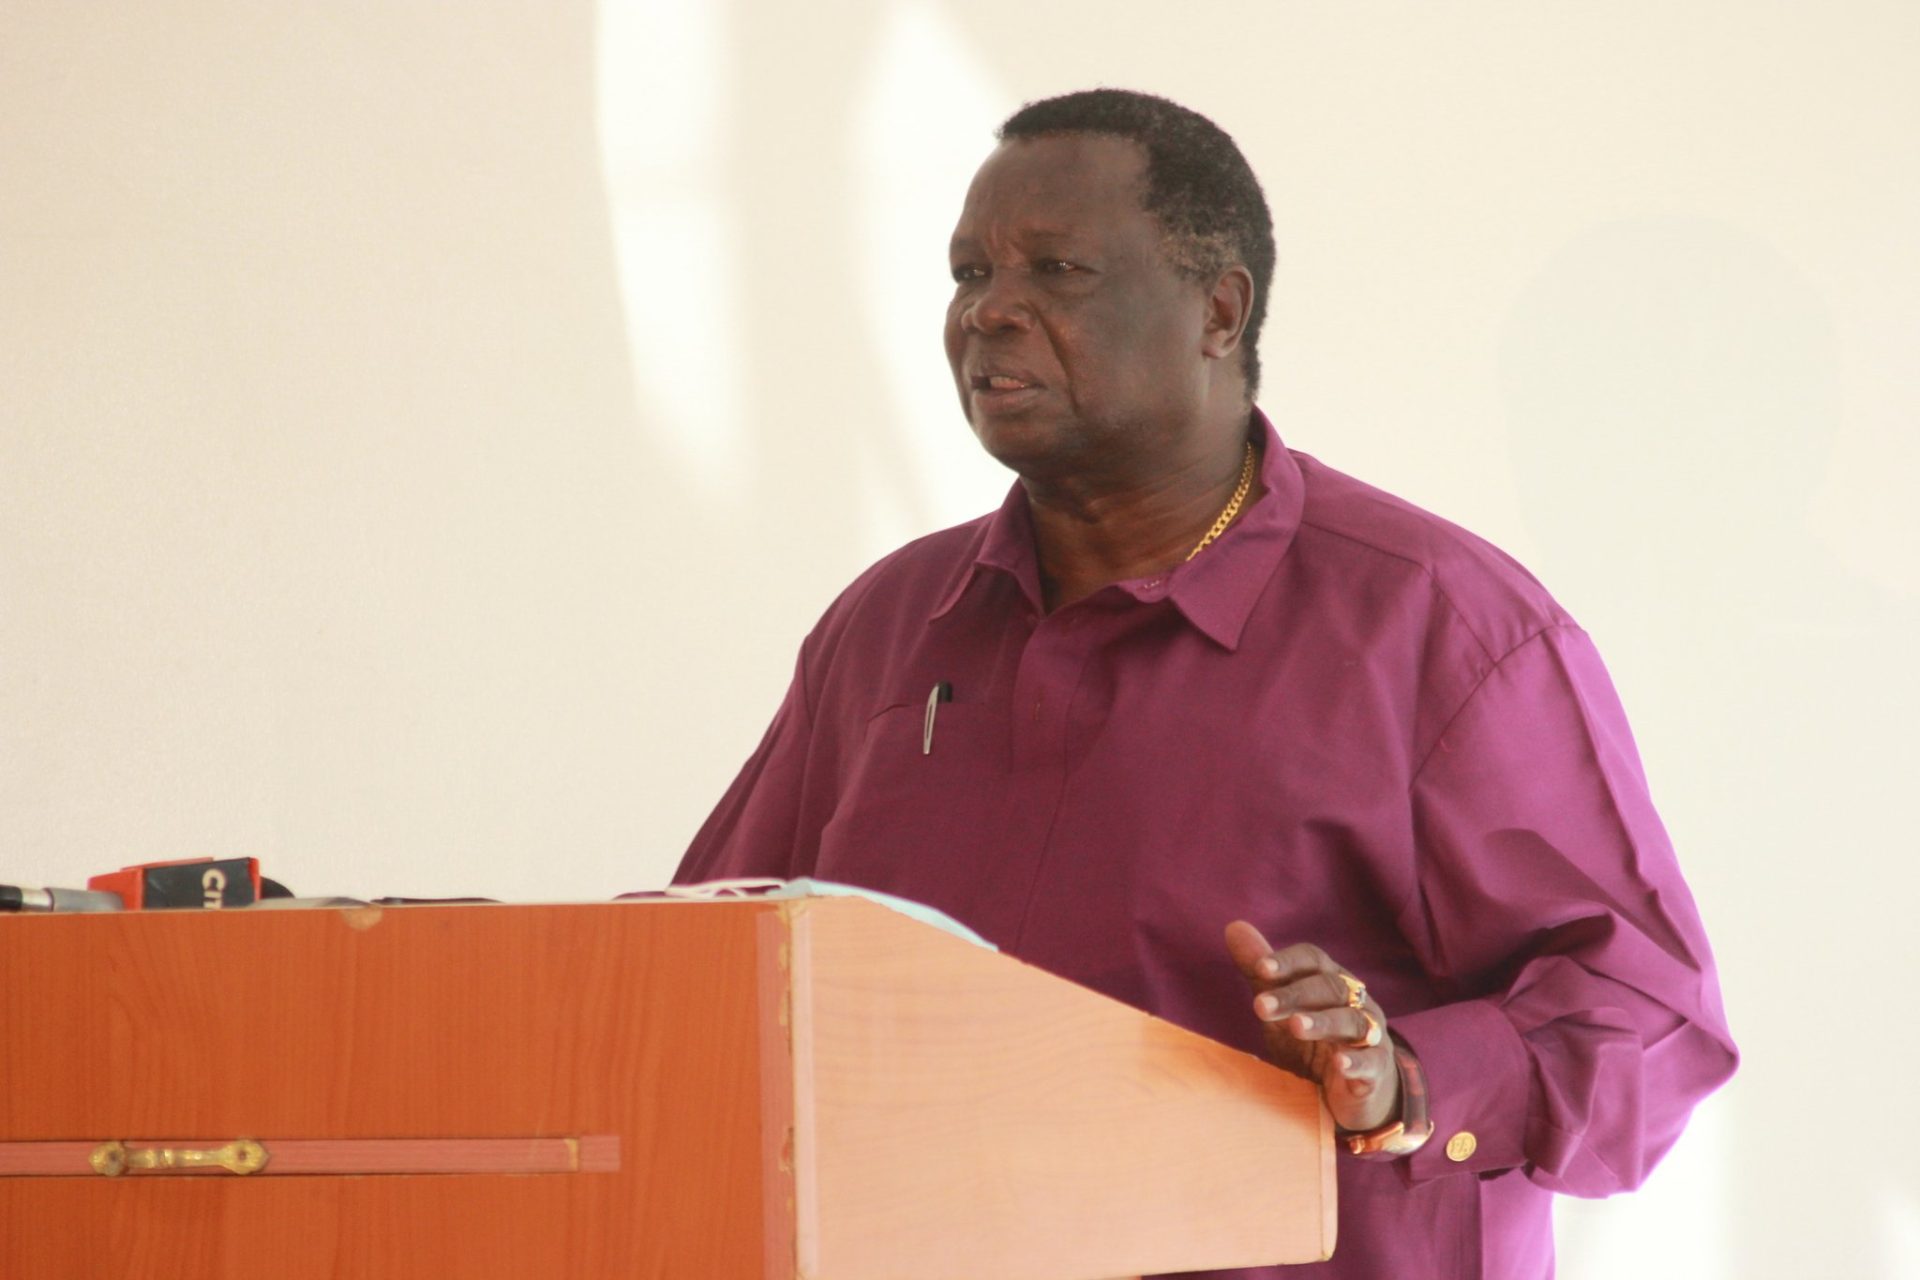 “Kenyan workers are suffering & should not tolerate the impunity & punishment,” COTU opposes fuel increase